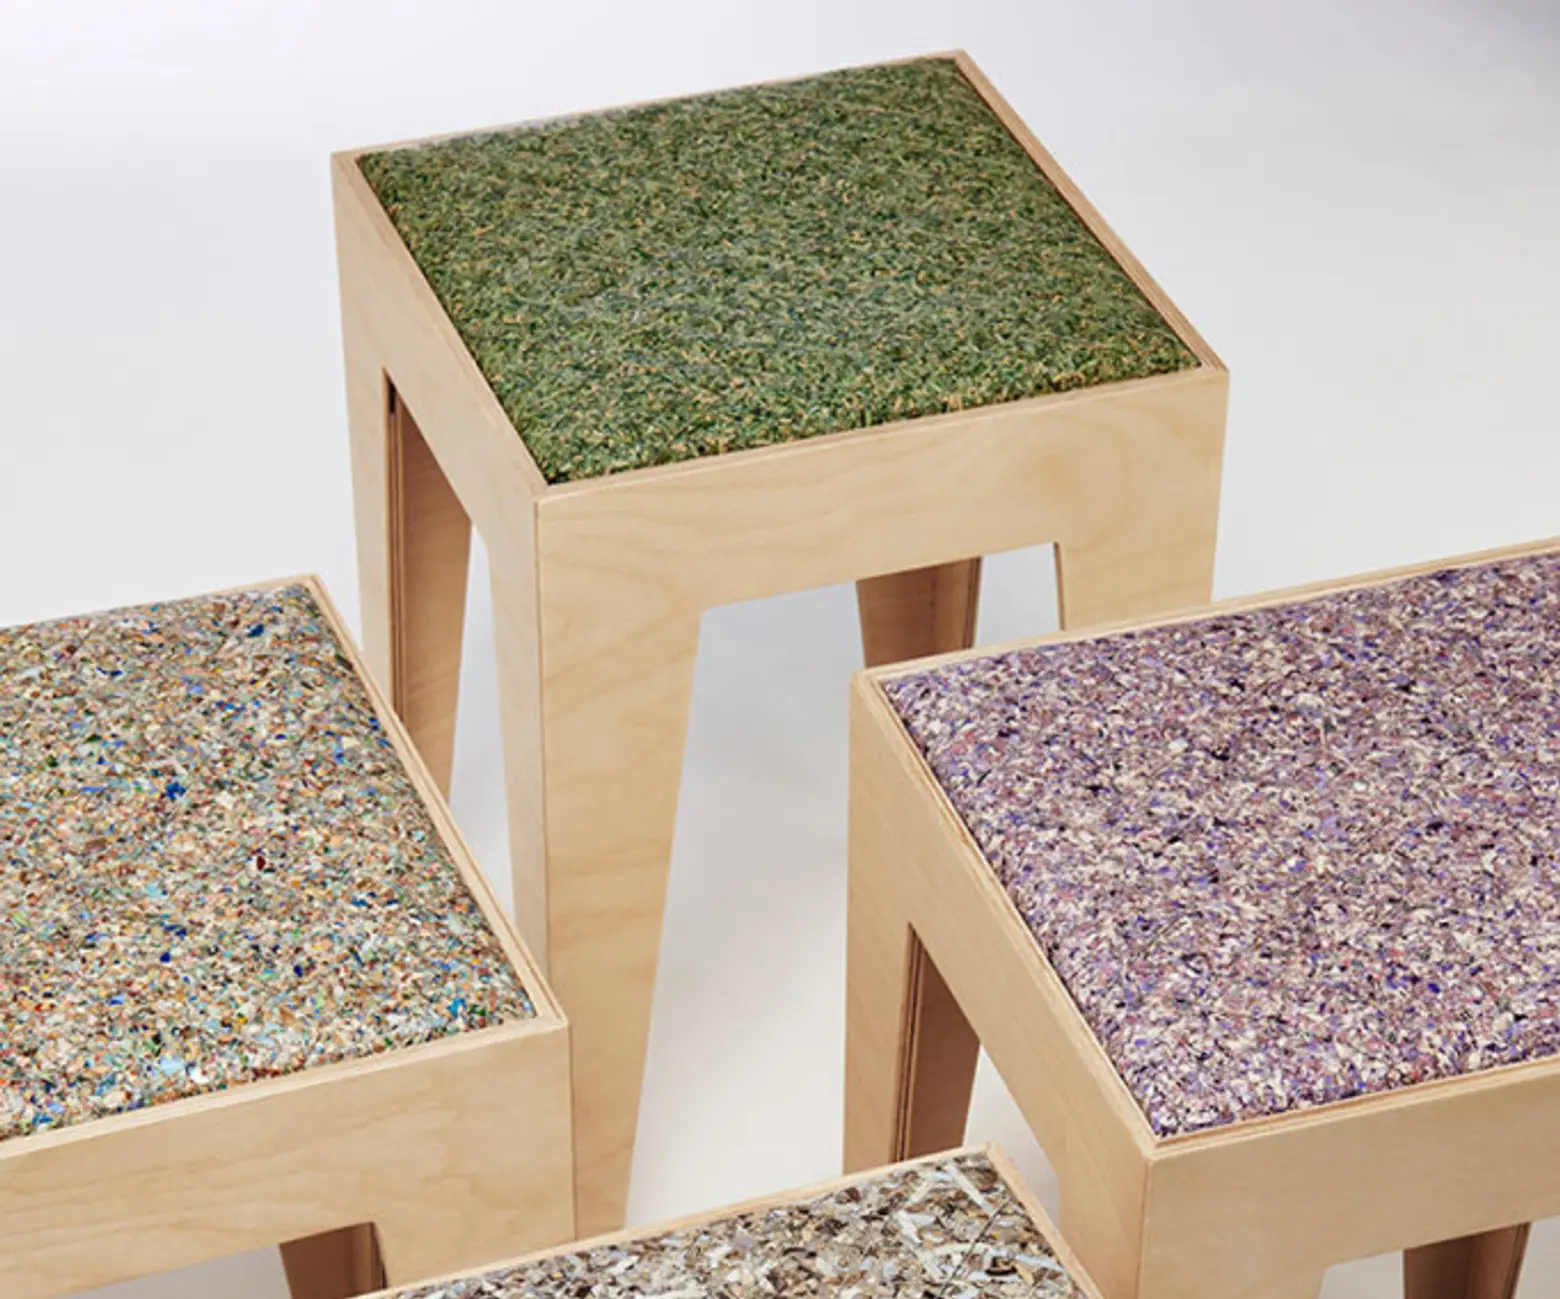 Real Money Gets Recycled Into New Fabric for Designer Furniture